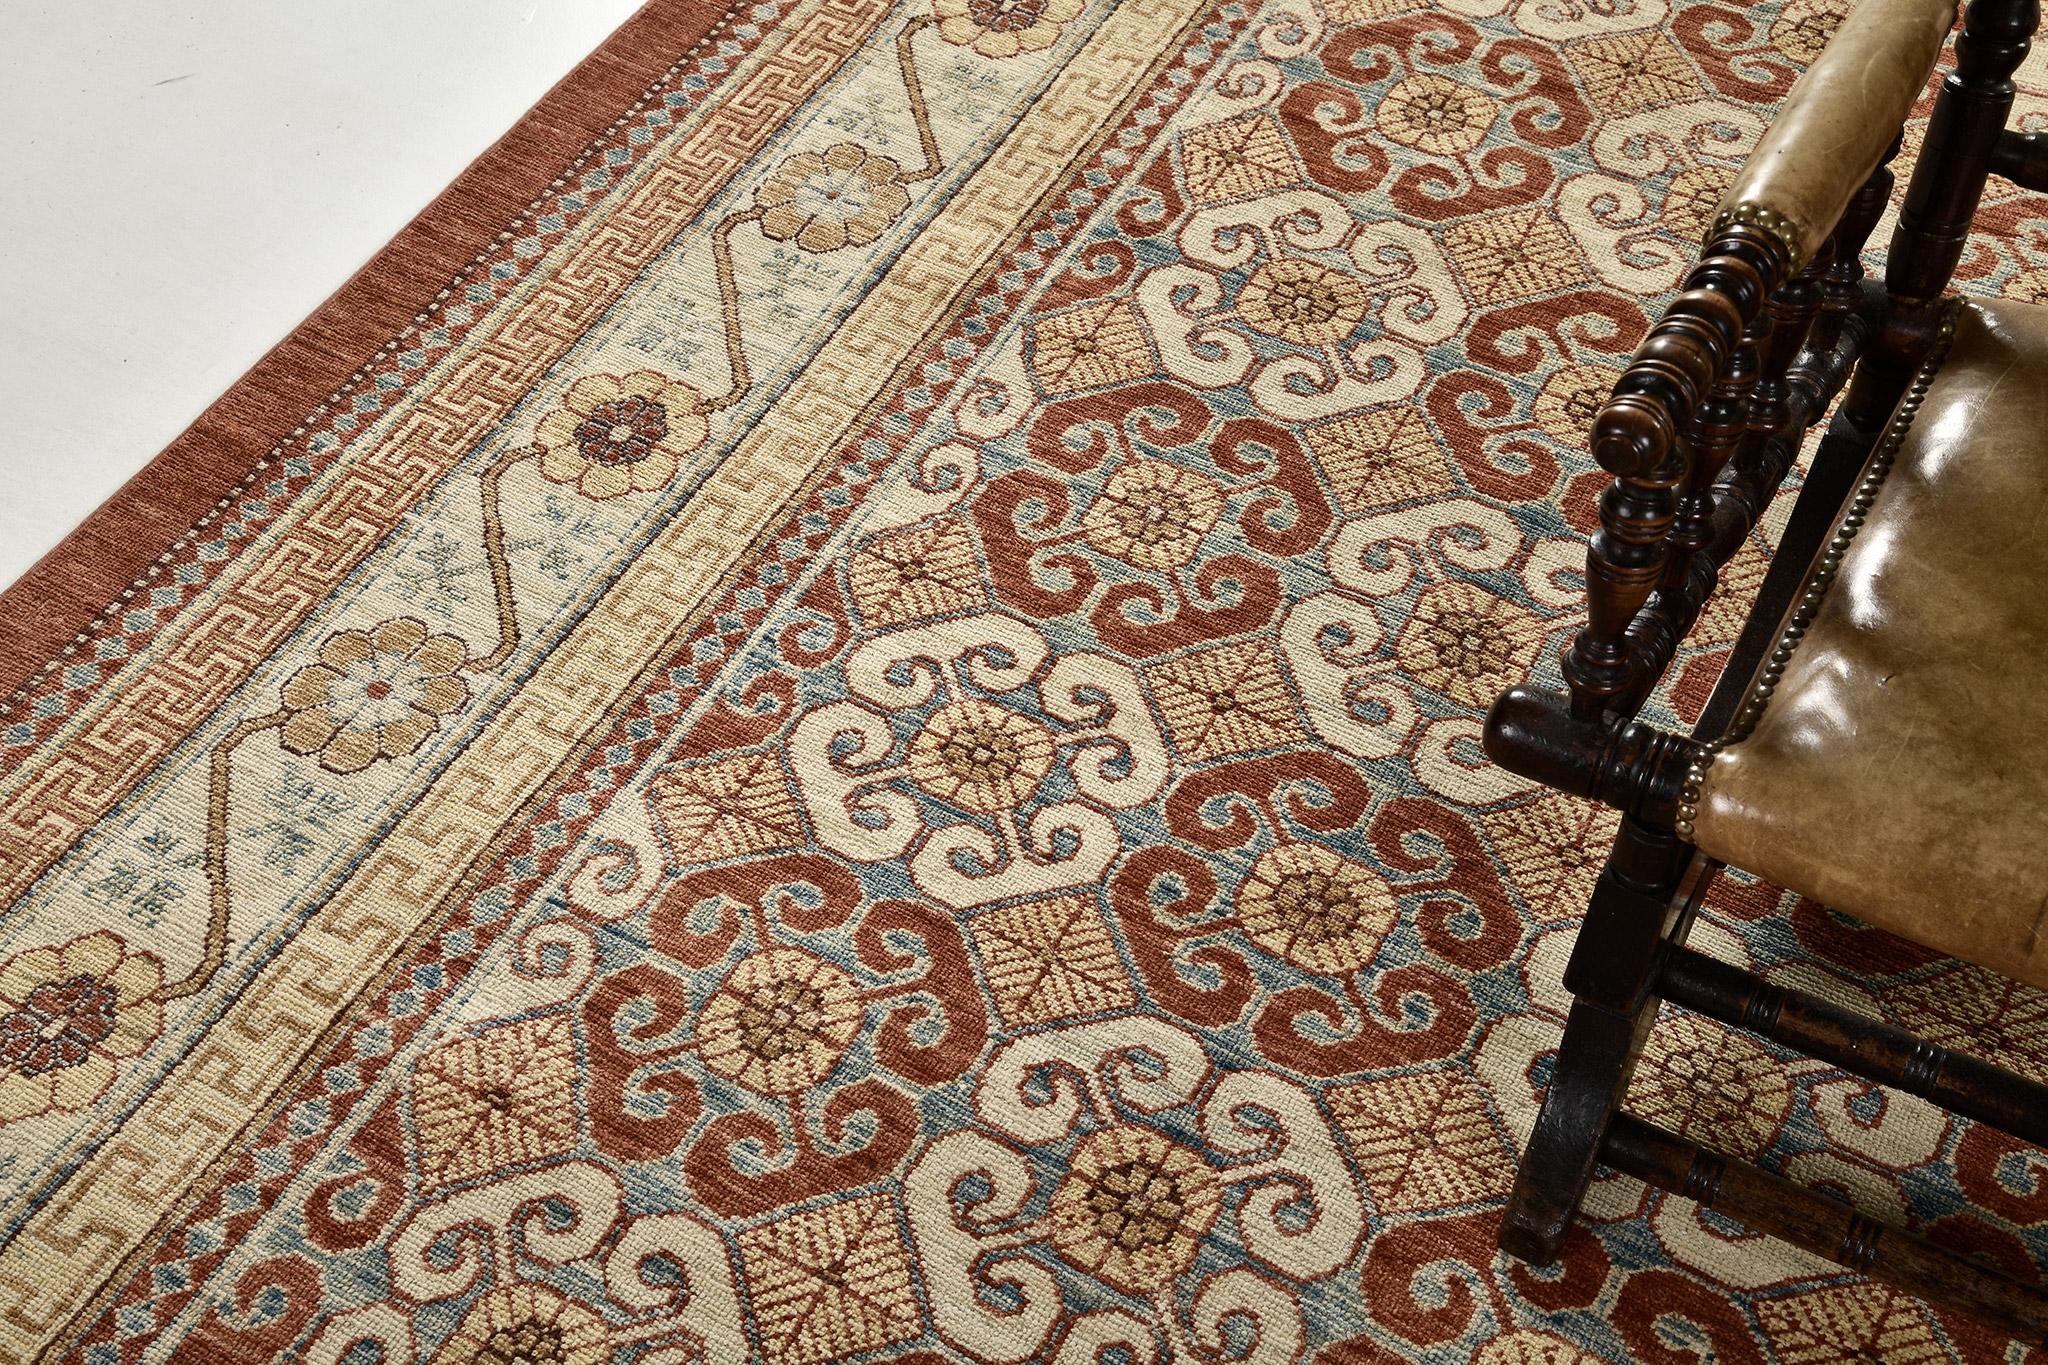 A phenomenal Mamluk revival that features the vivid tones gold, orange, dusty blue and and cream that gives a space a contemporary feel. Featuring the all-over ornate embellishments of a flower enclosed by a Ram’s horn which symbolizes power, this